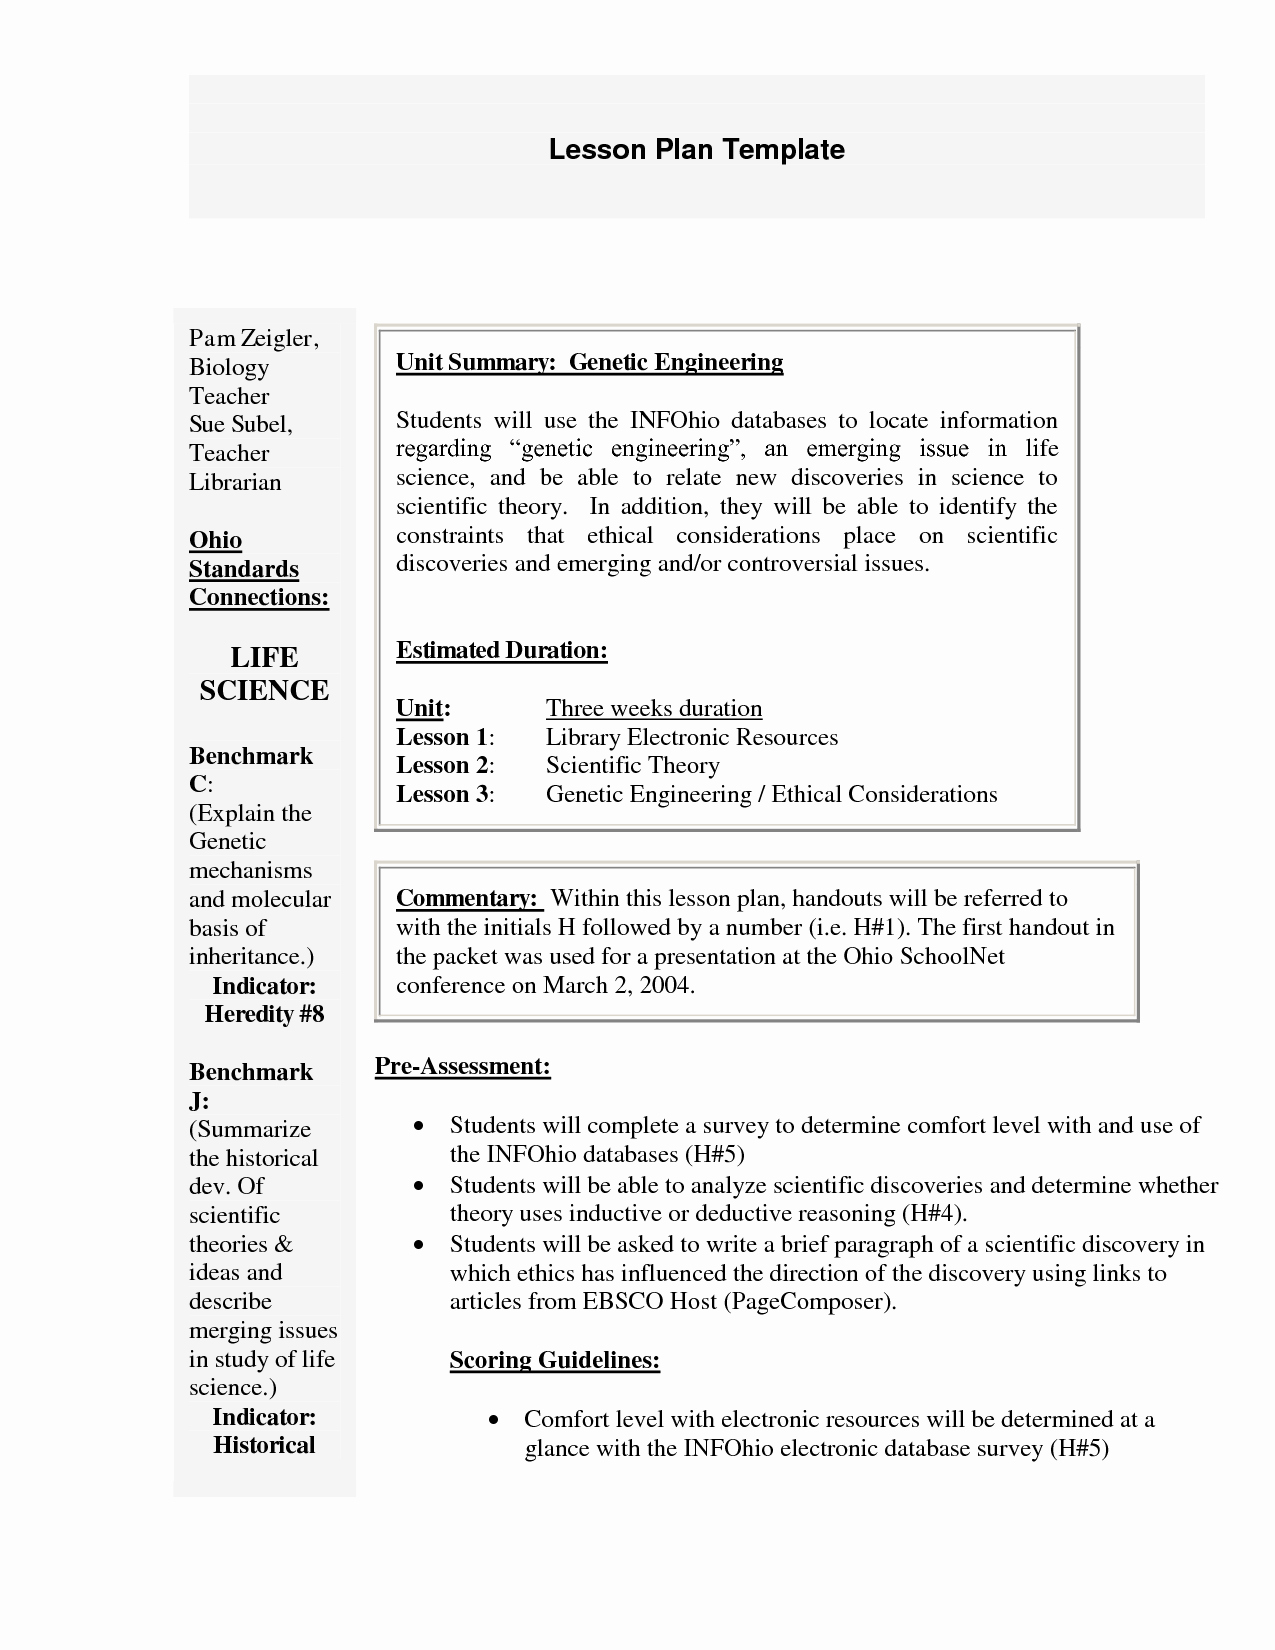 Florida Lesson Plan Template Awesome Best S Of Florida Lesson Plan Template Preschool